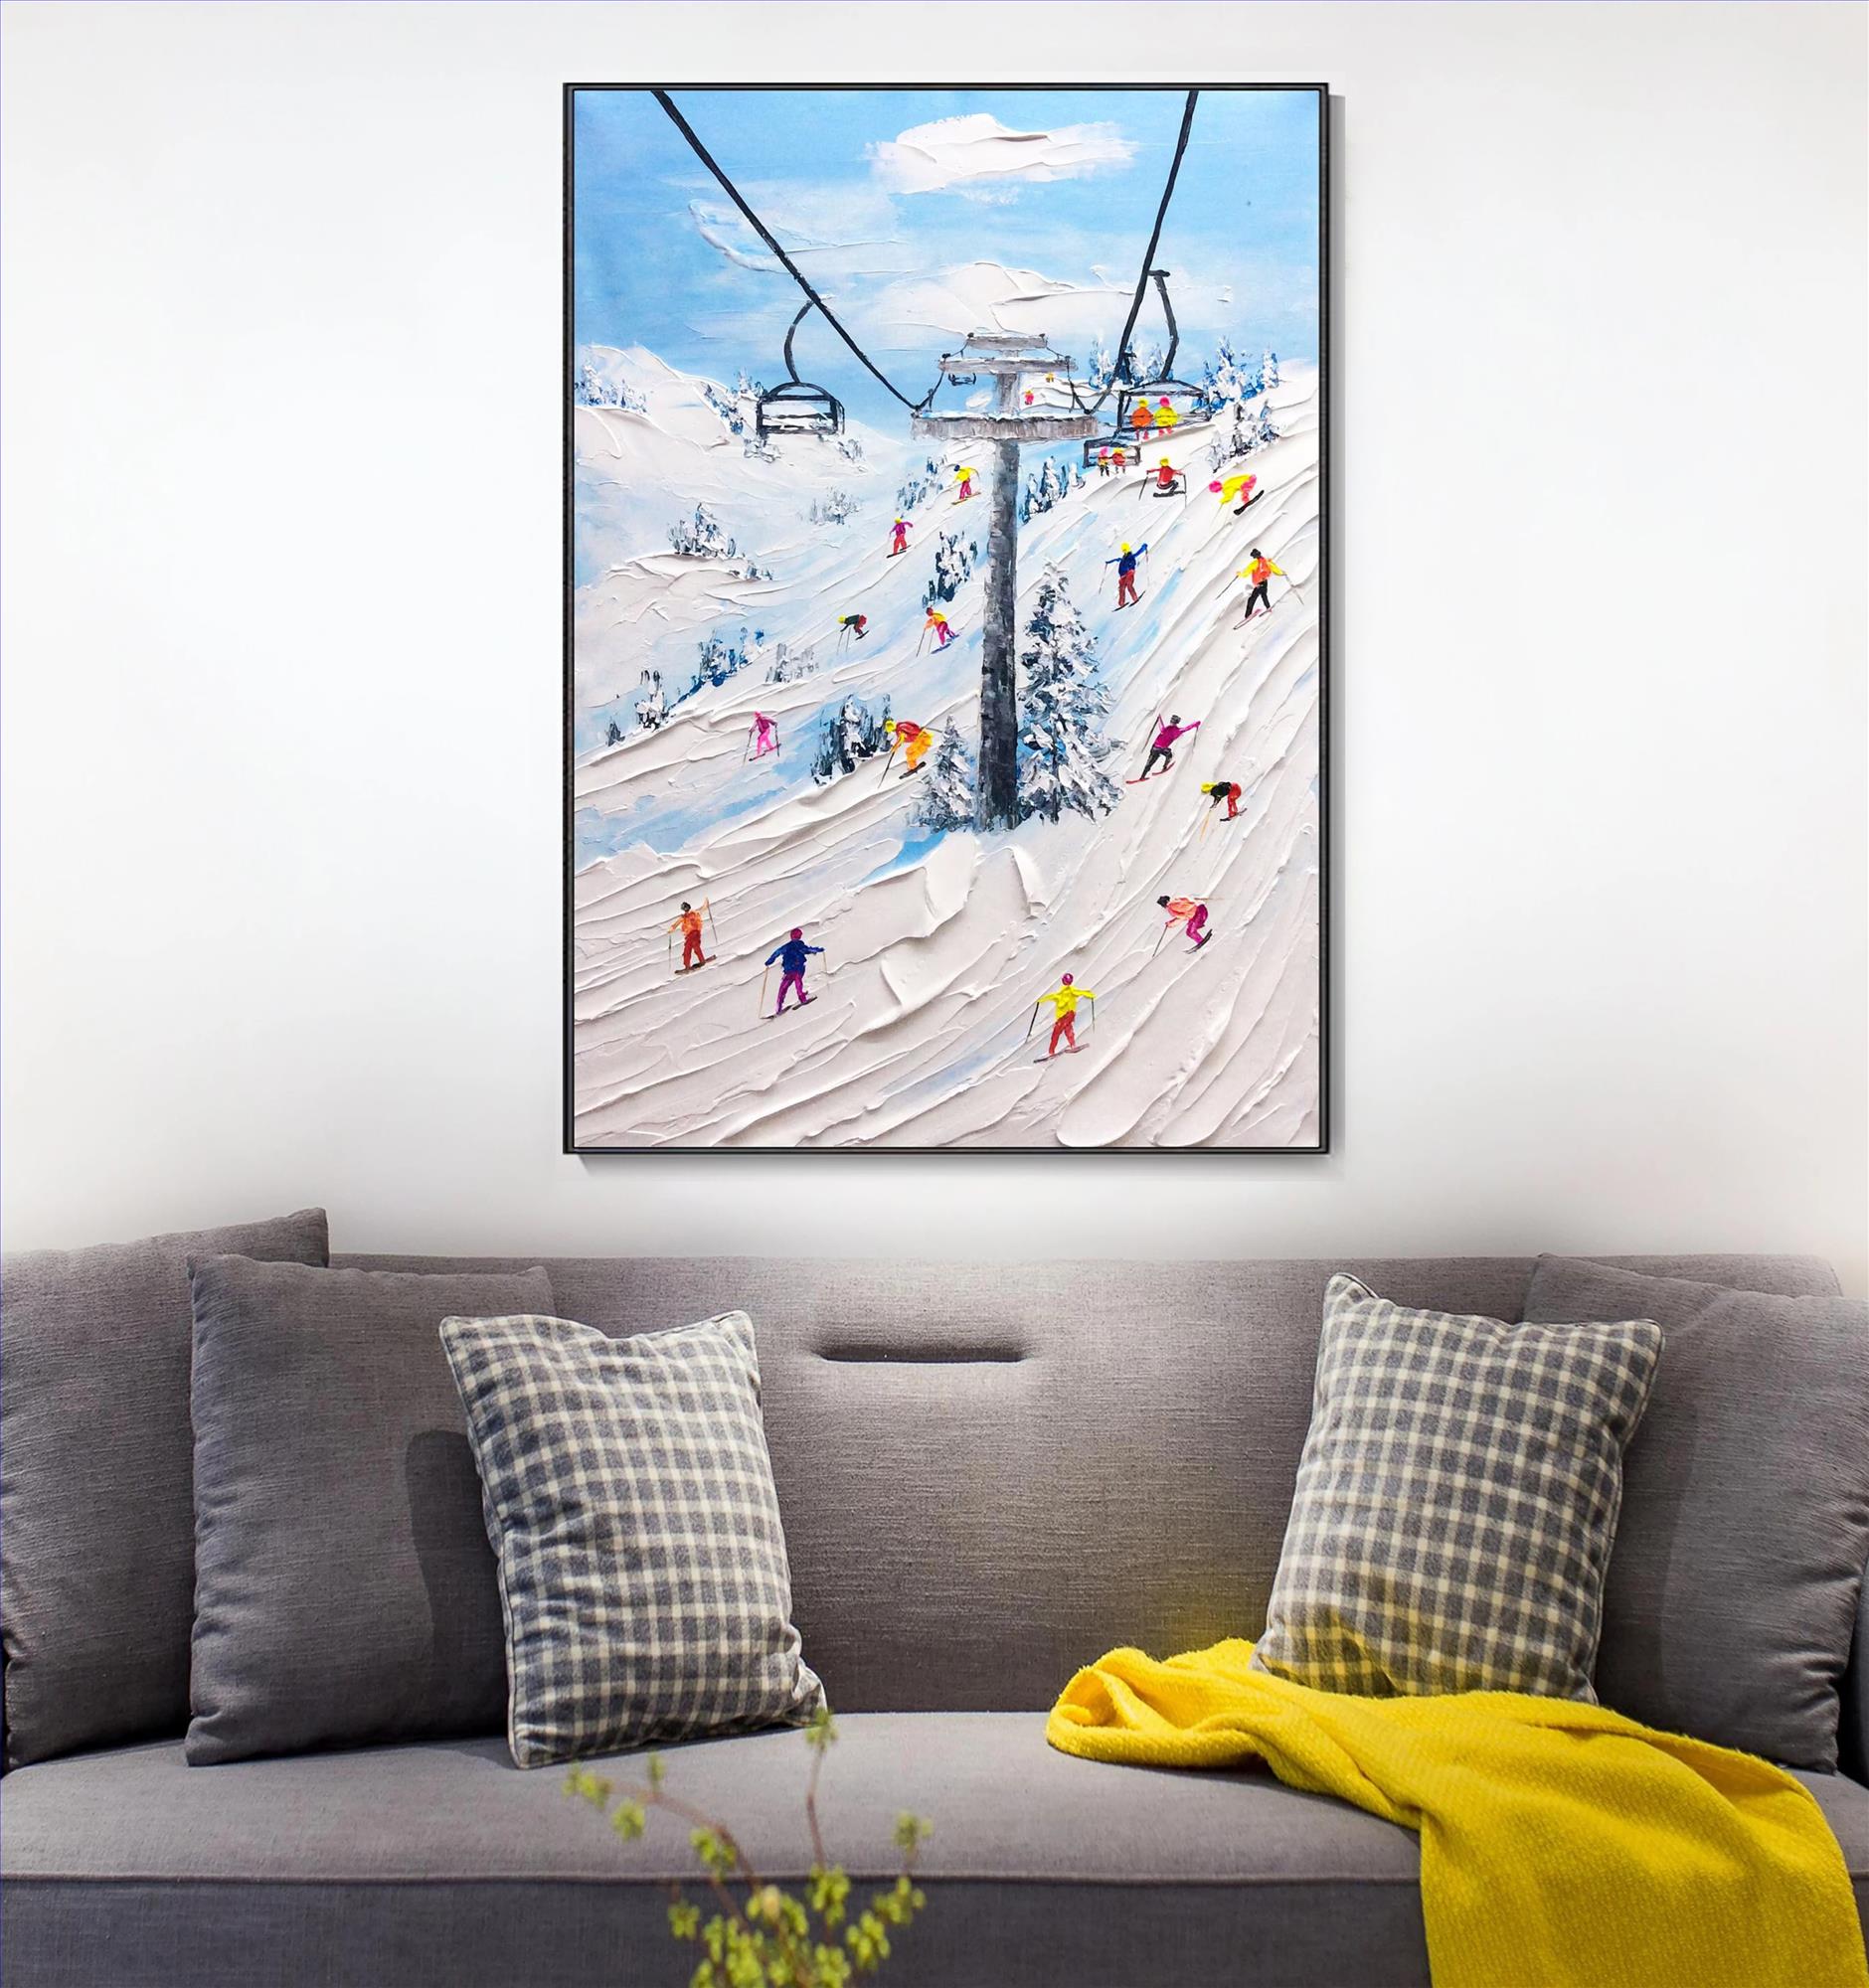 Skier on Snowy Mountain Wall Art Sport White Snow Skiing Room Decor by Knife 20 texture Oil Paintings